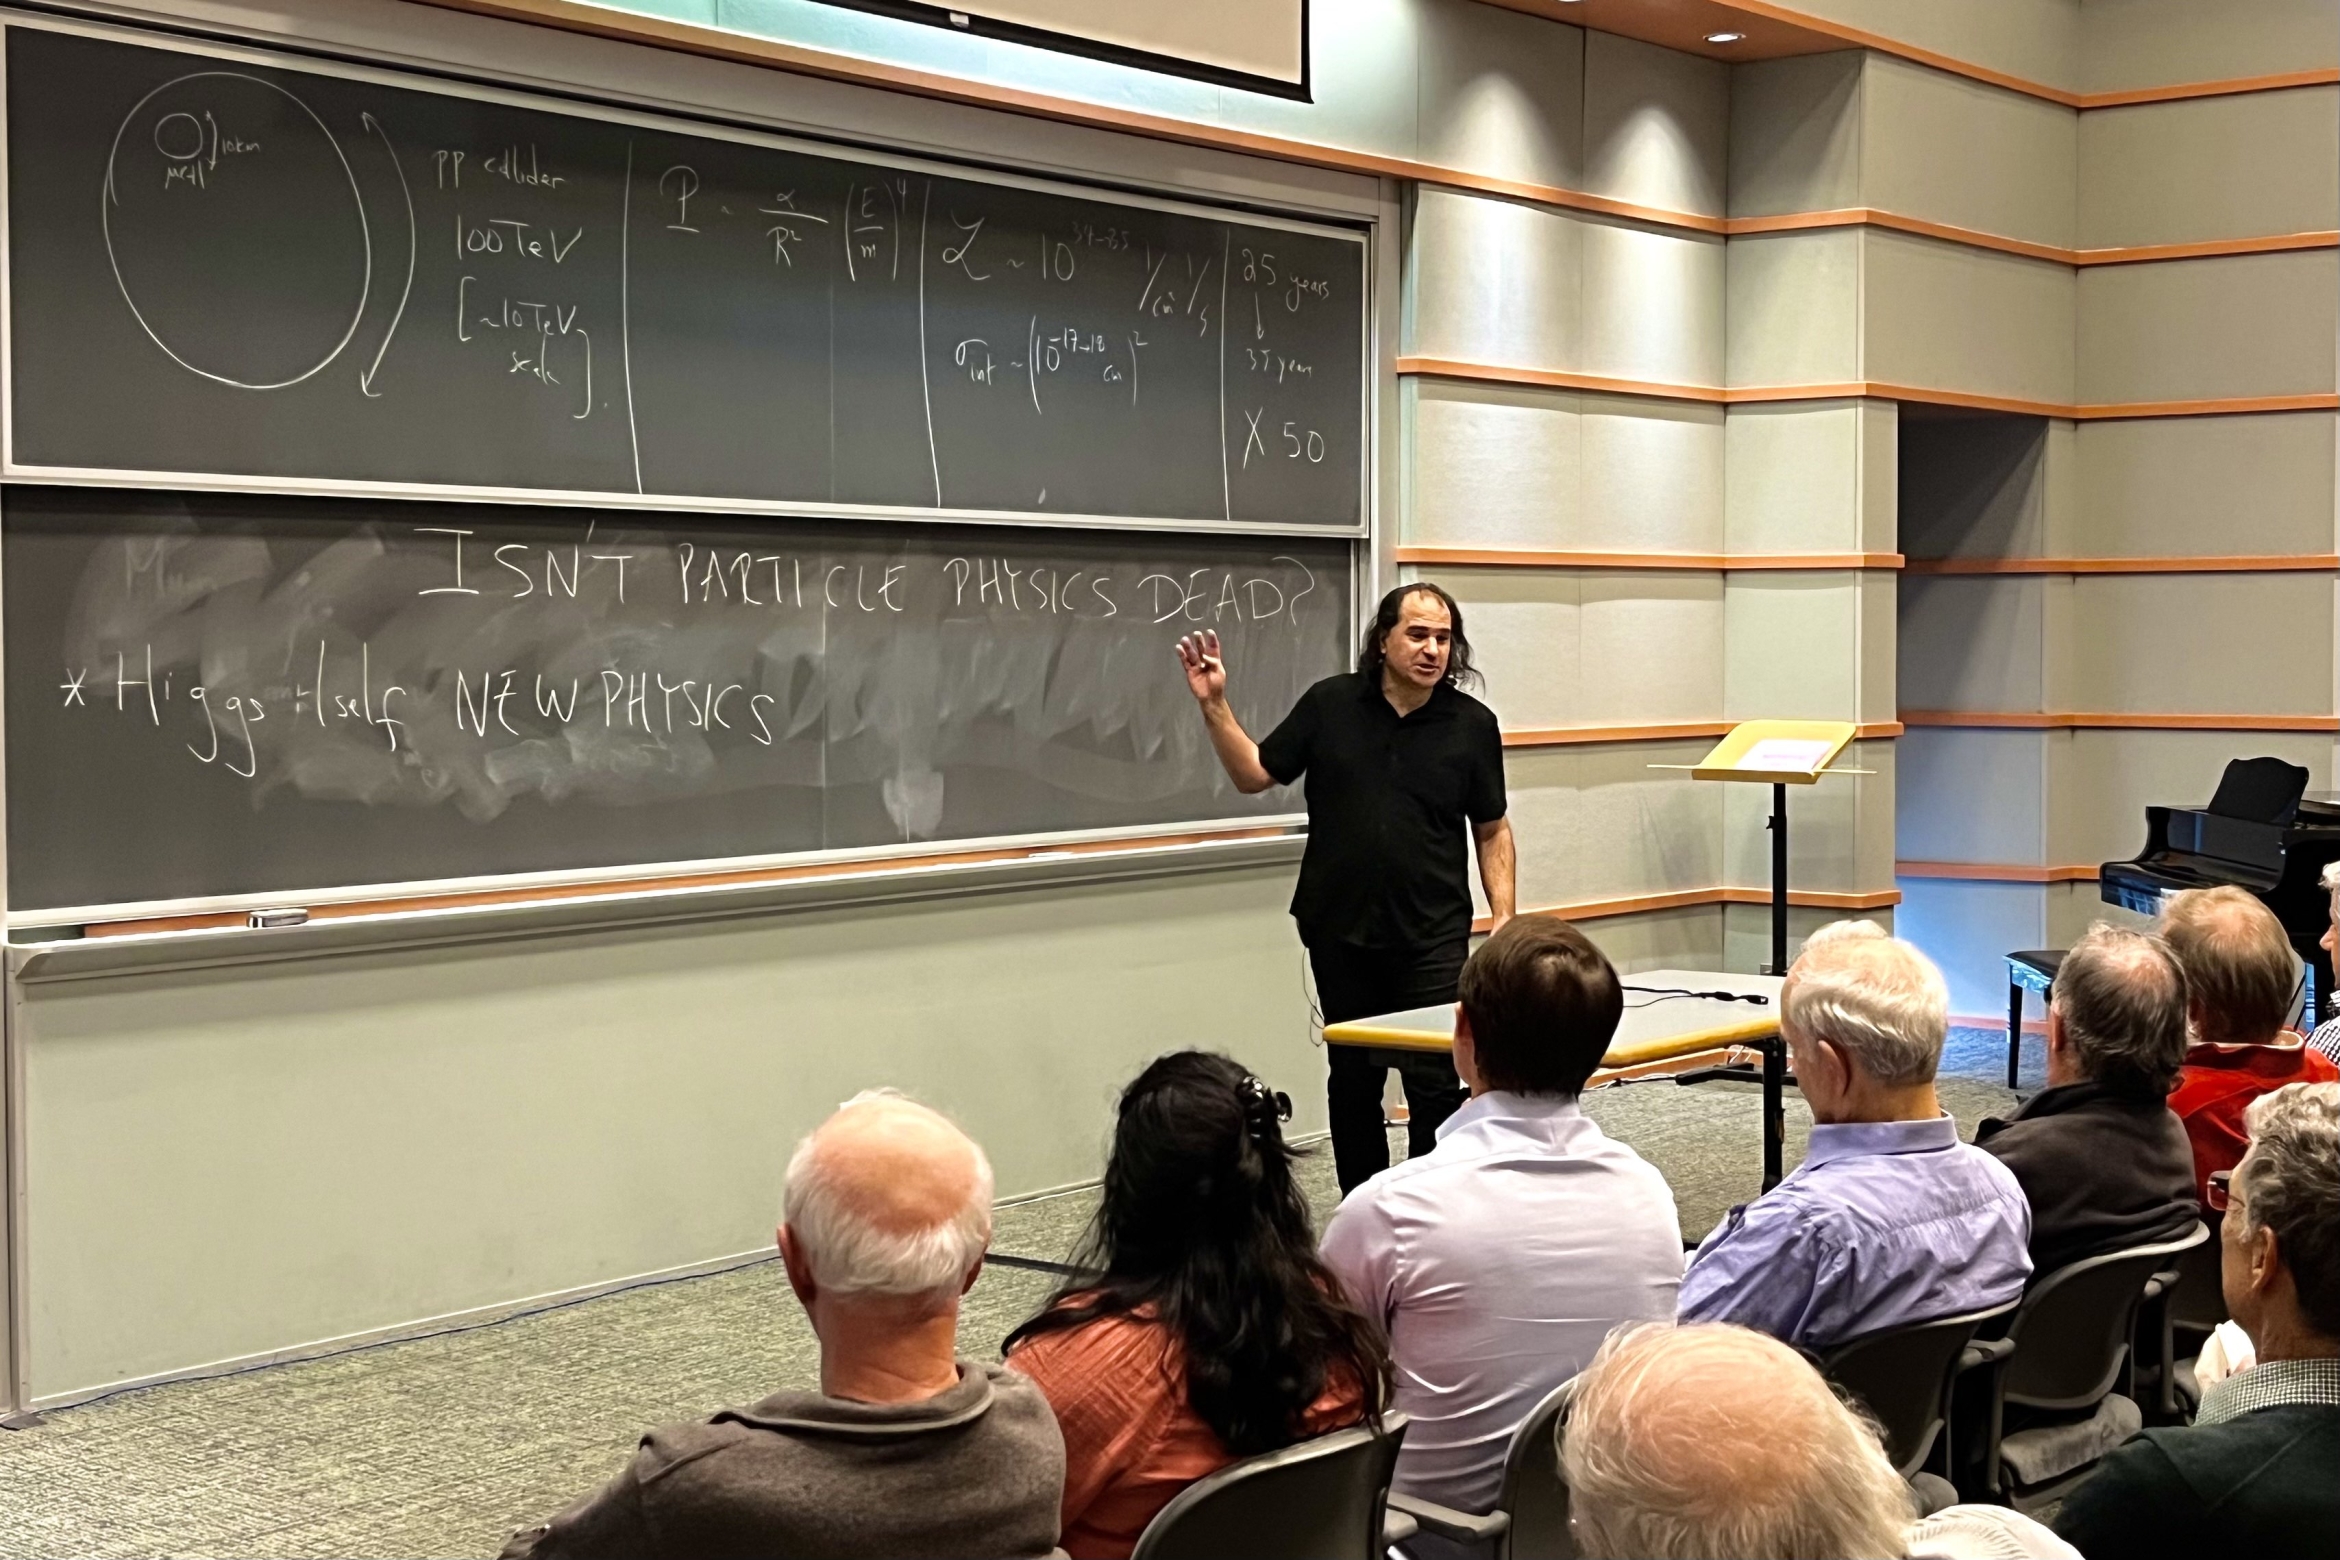 “Particle physics isn’t dead,” reads the blackboard behind an expressive physicist presenting to a packed audience.